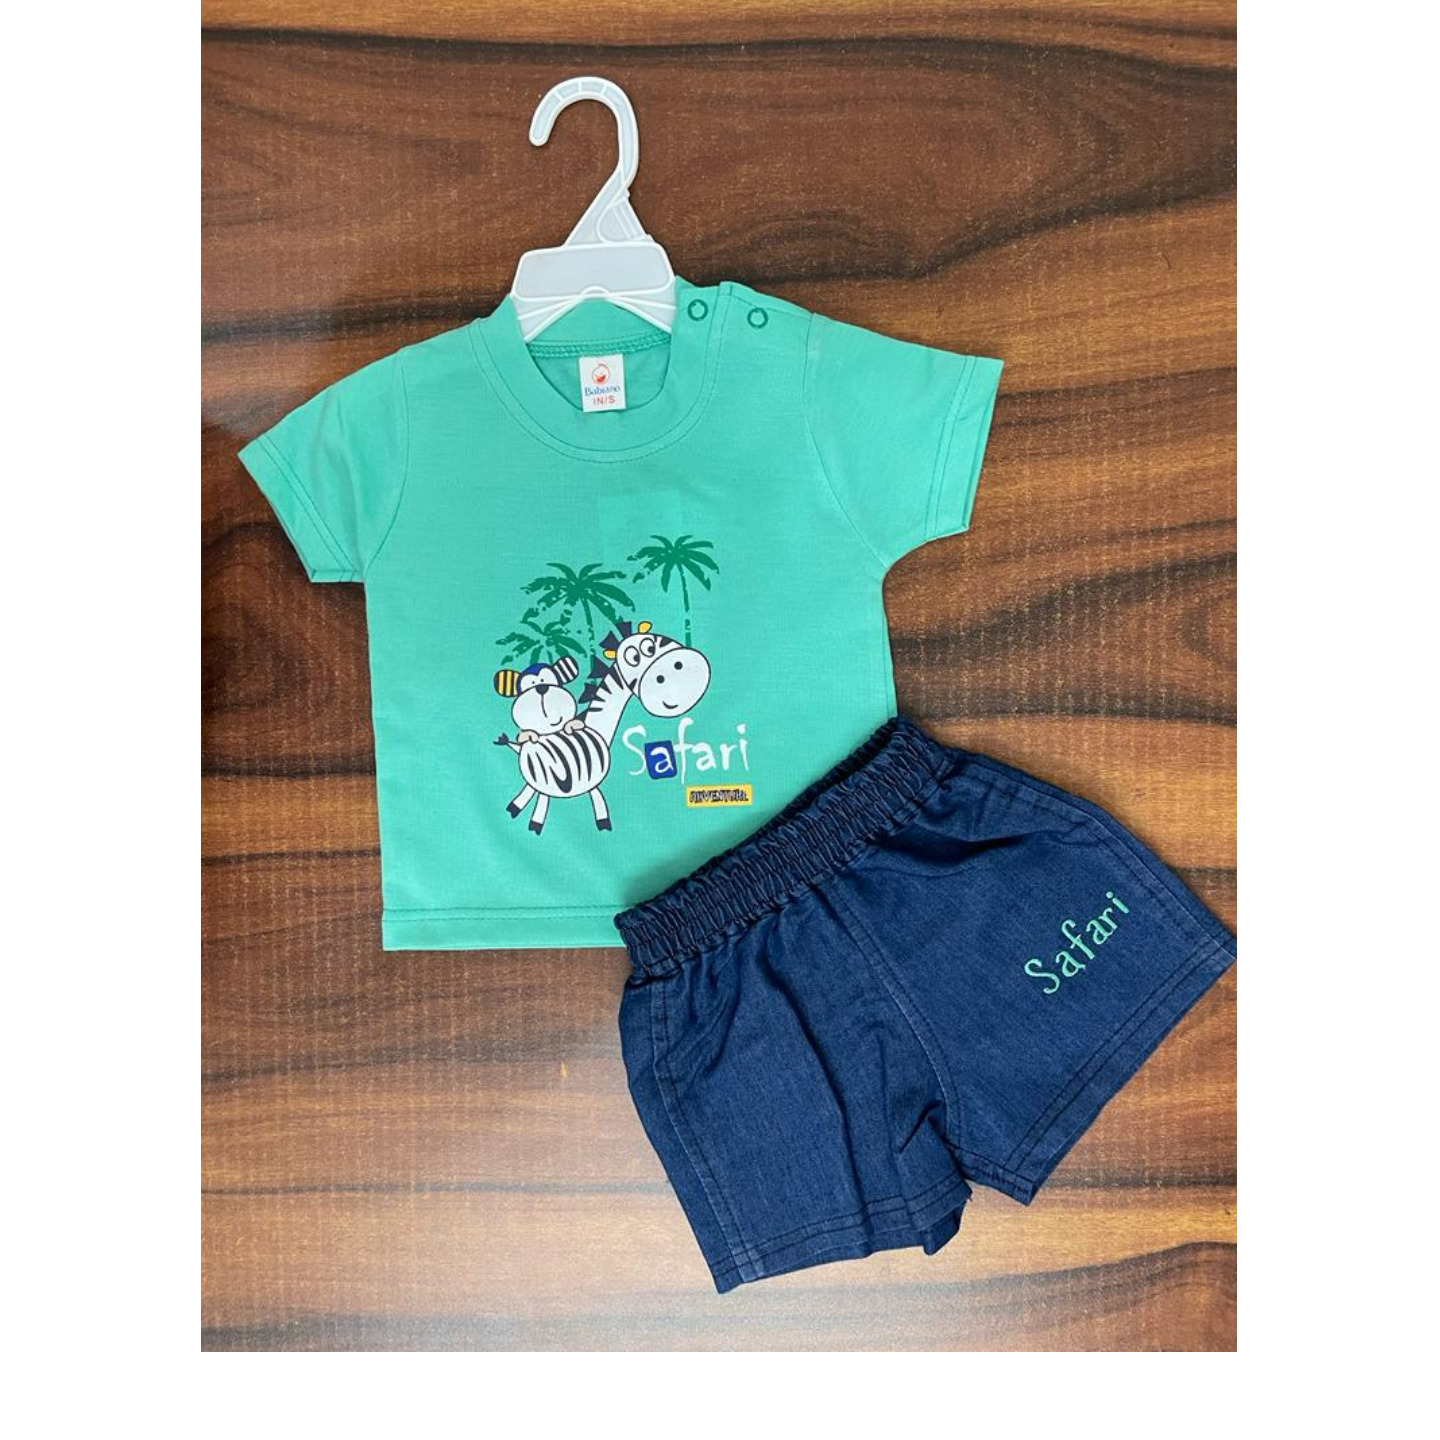 Babiano Denim Nikar Set Rs 590 Only Made In India Small Size to 3 Years